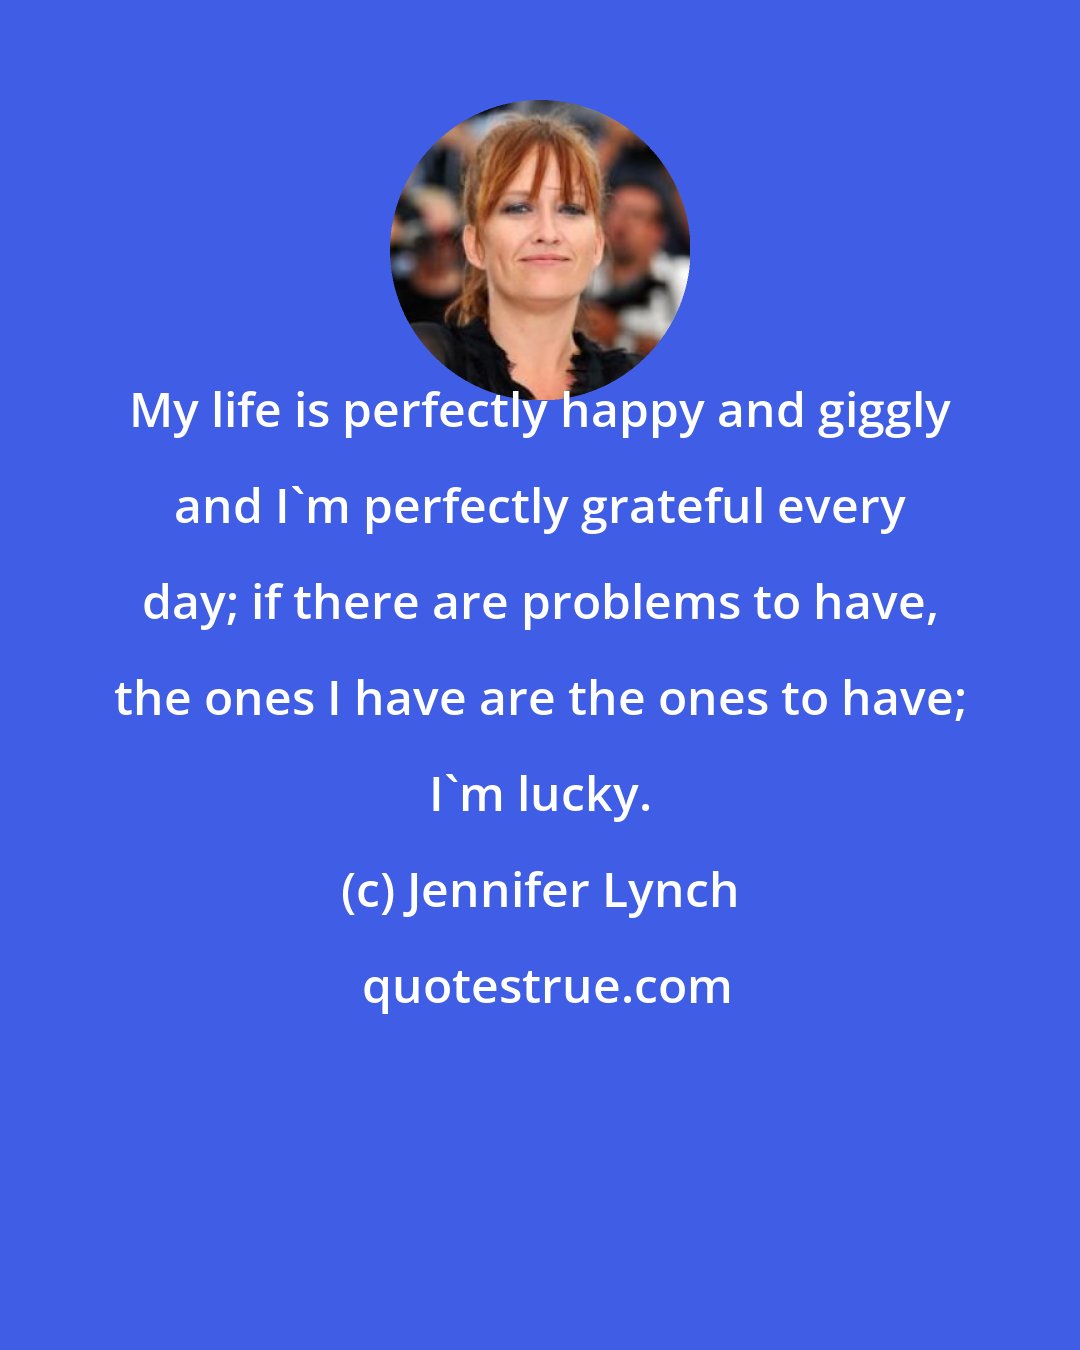 Jennifer Lynch: My life is perfectly happy and giggly and I'm perfectly grateful every day; if there are problems to have, the ones I have are the ones to have; I'm lucky.